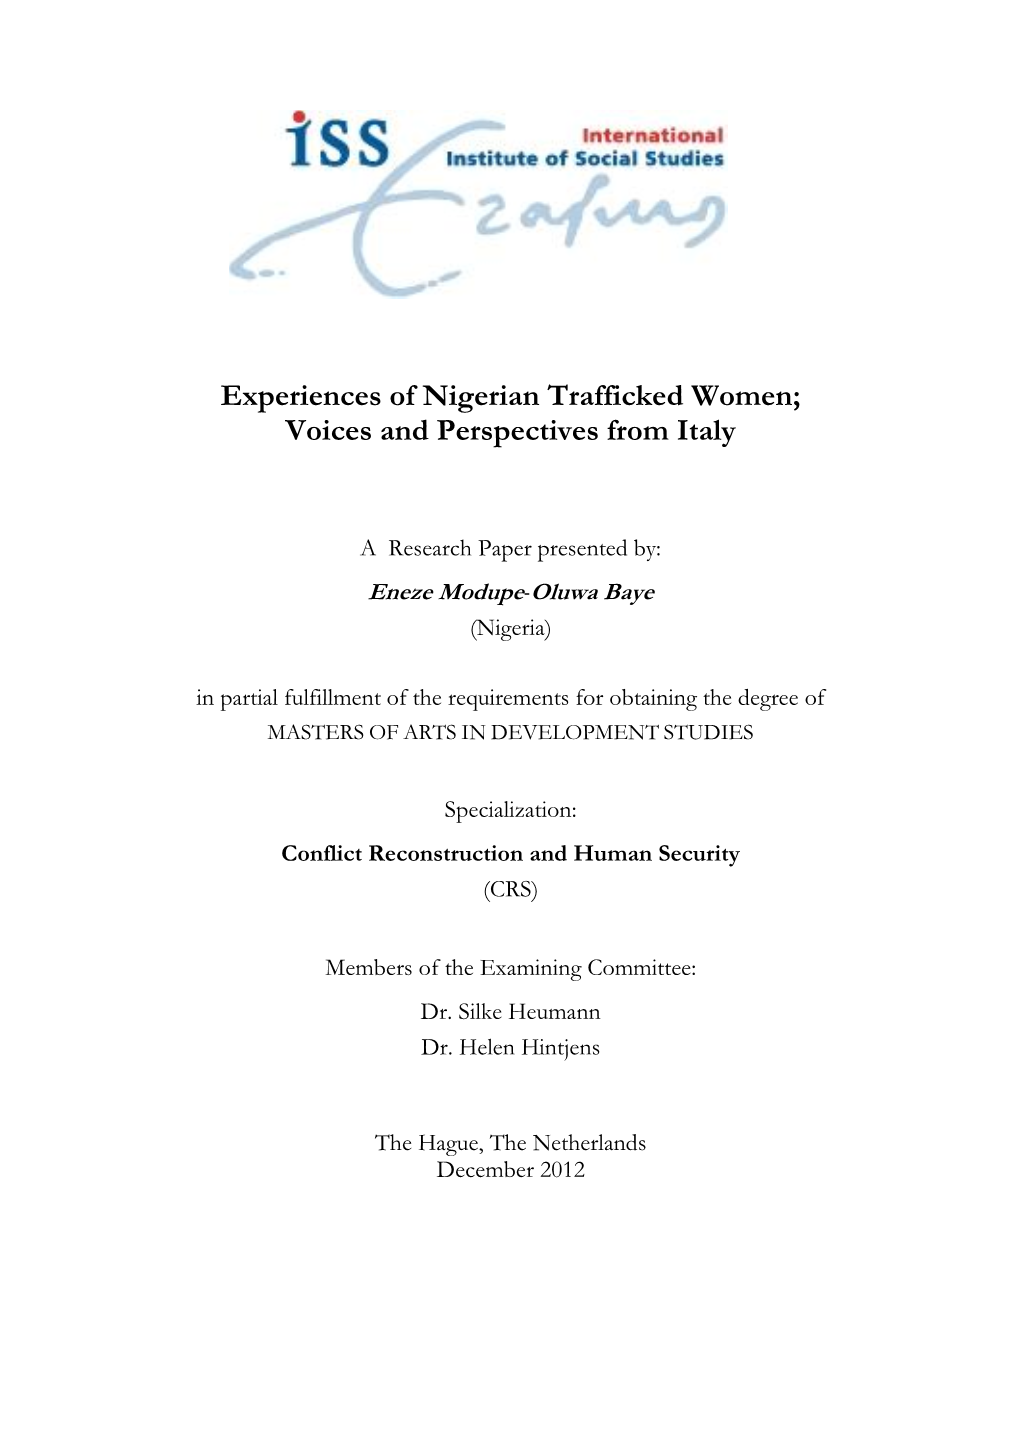 Experiences of Nigerian Trafficked Women; Voices and Perspectives from Italy